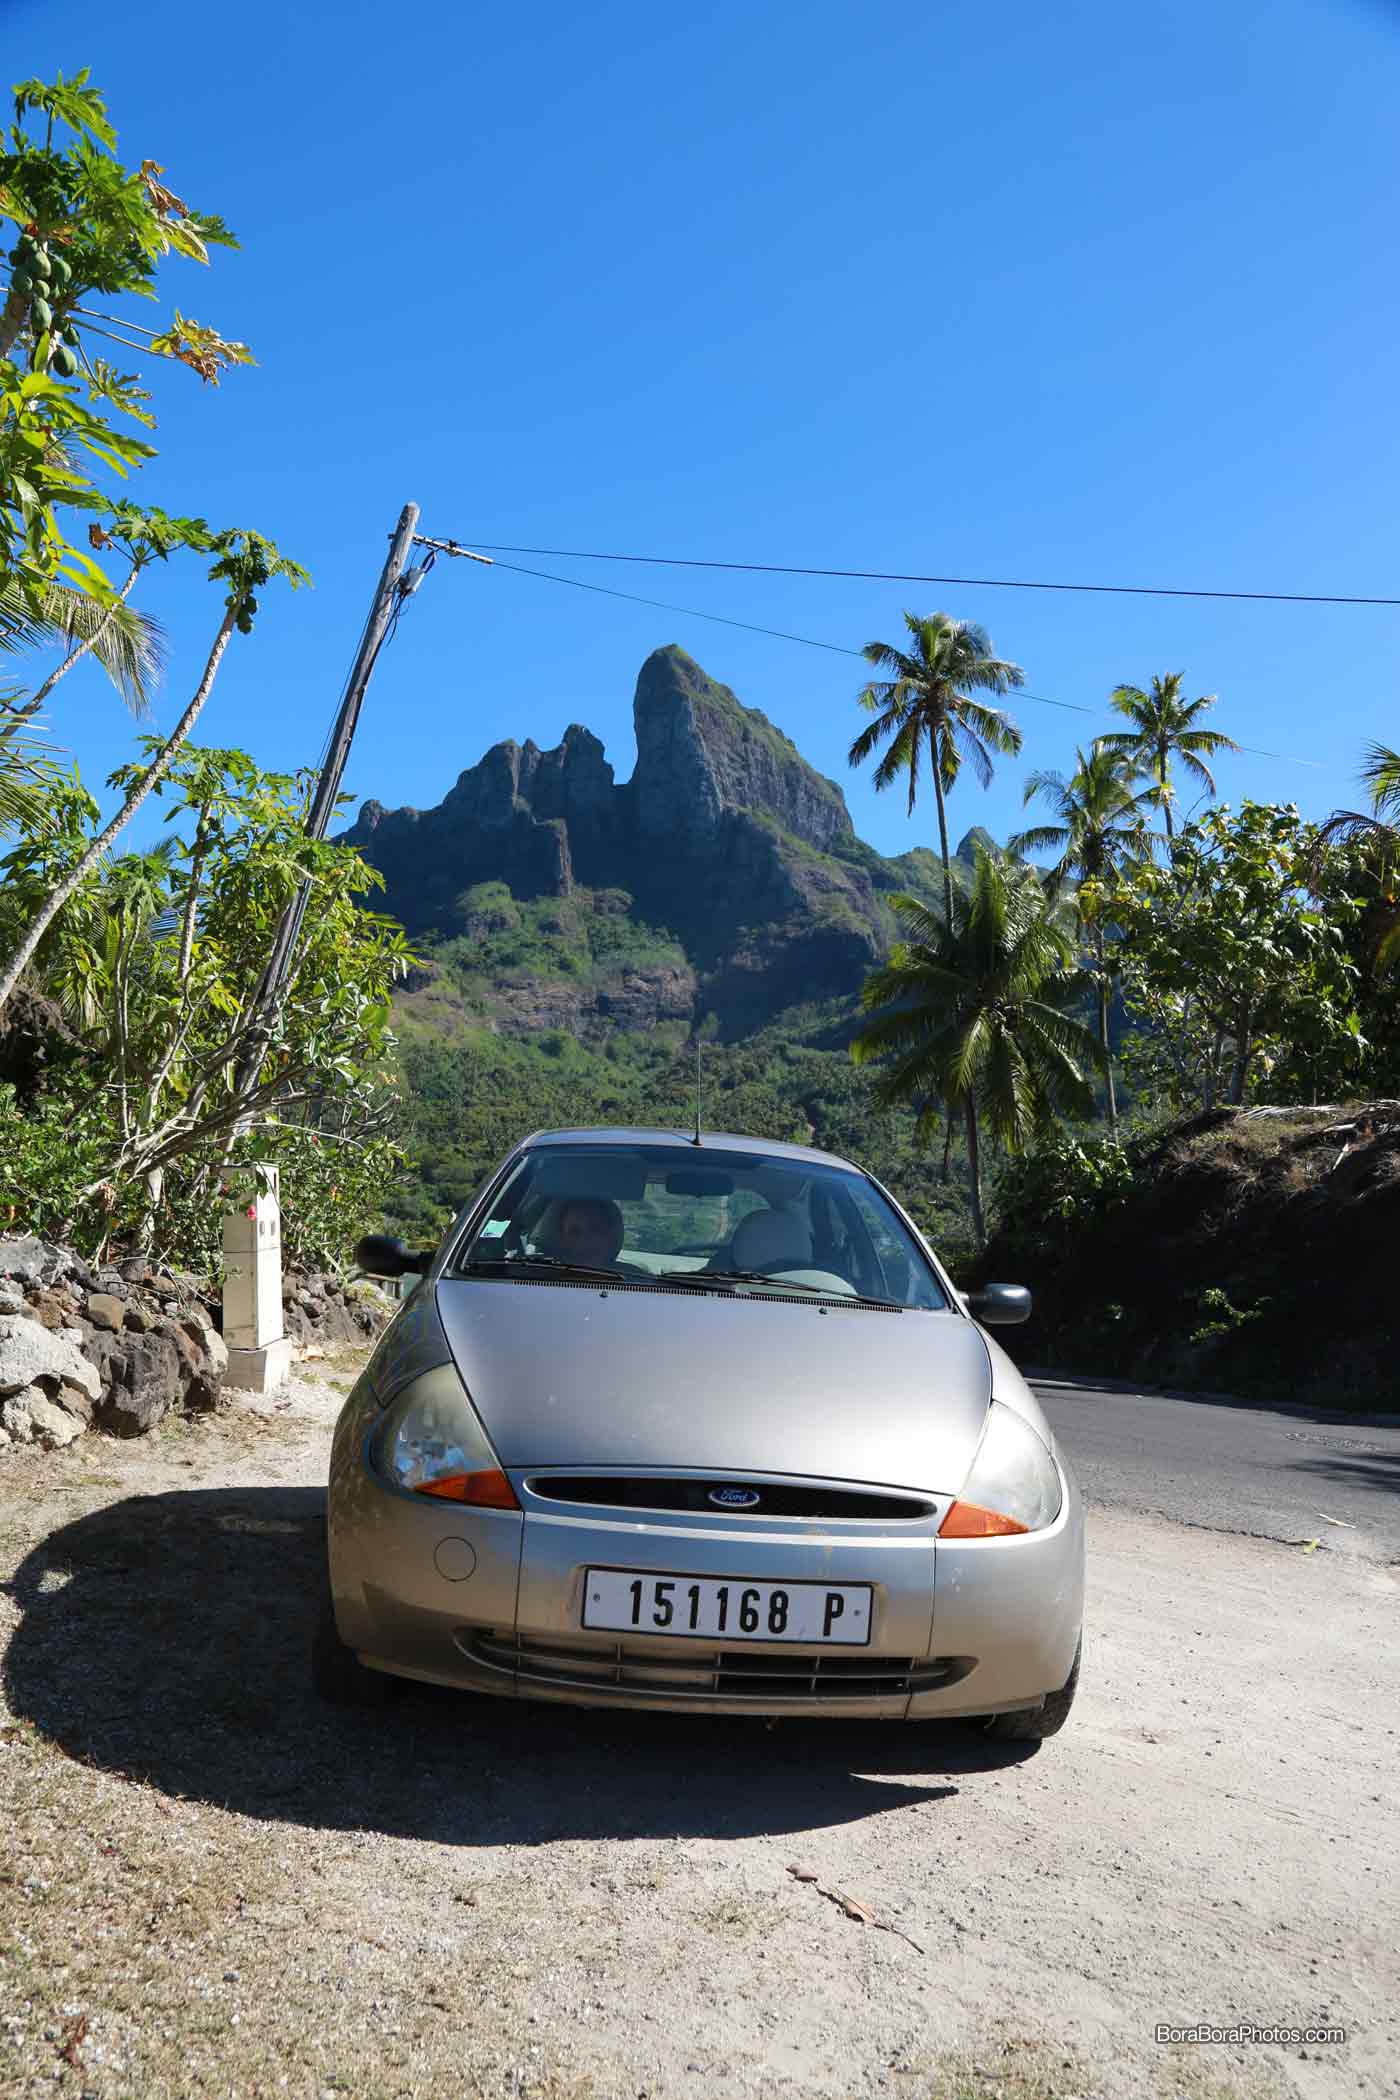 Picture of a car in Bora Bora with a view of Mt. Otemanu in the background